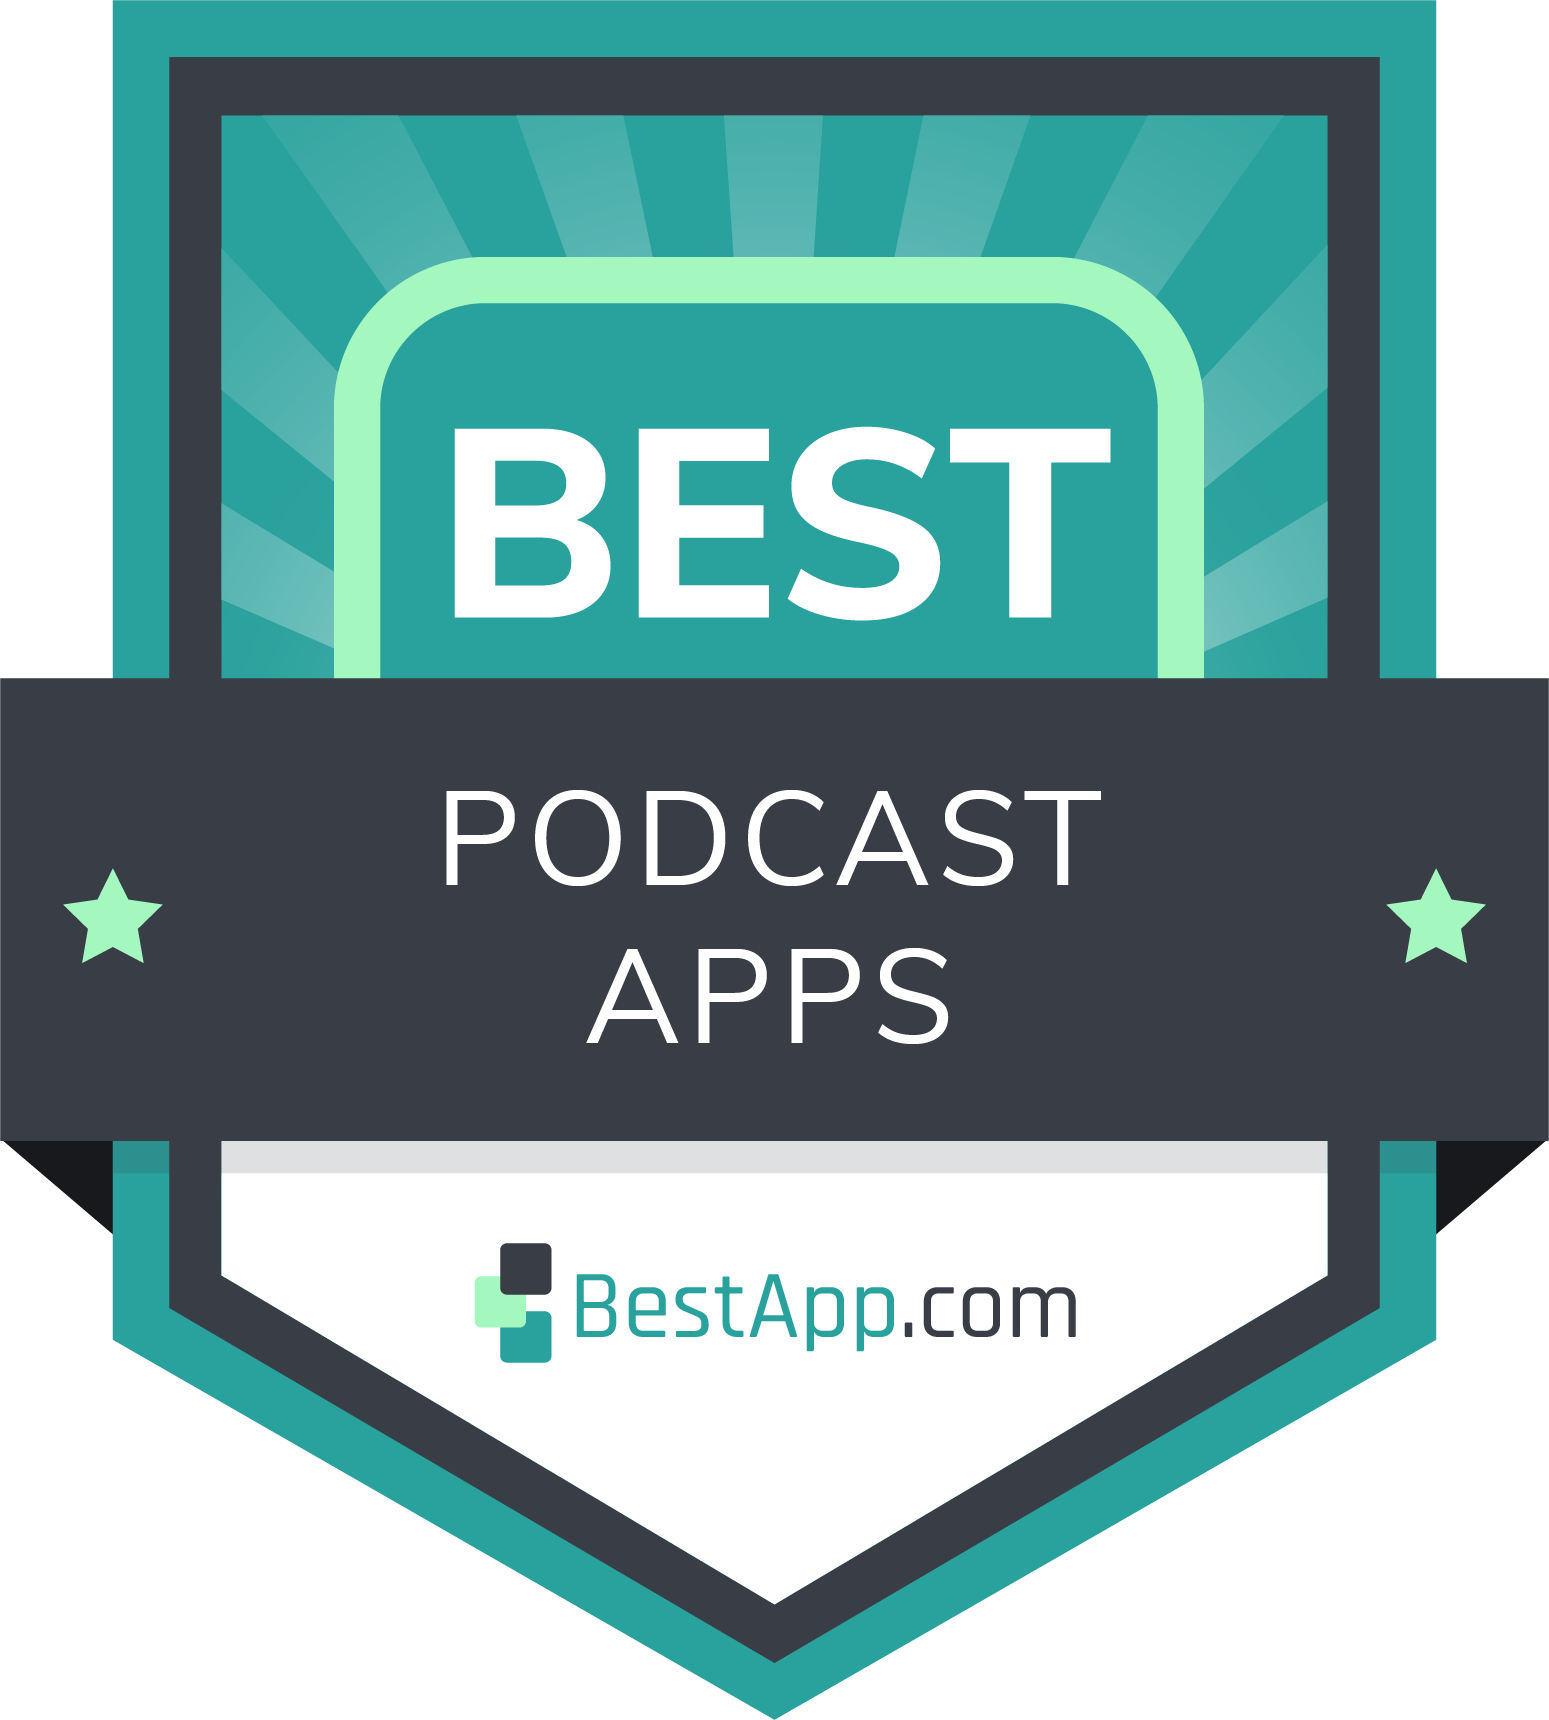 Best Podcast Apps Badge